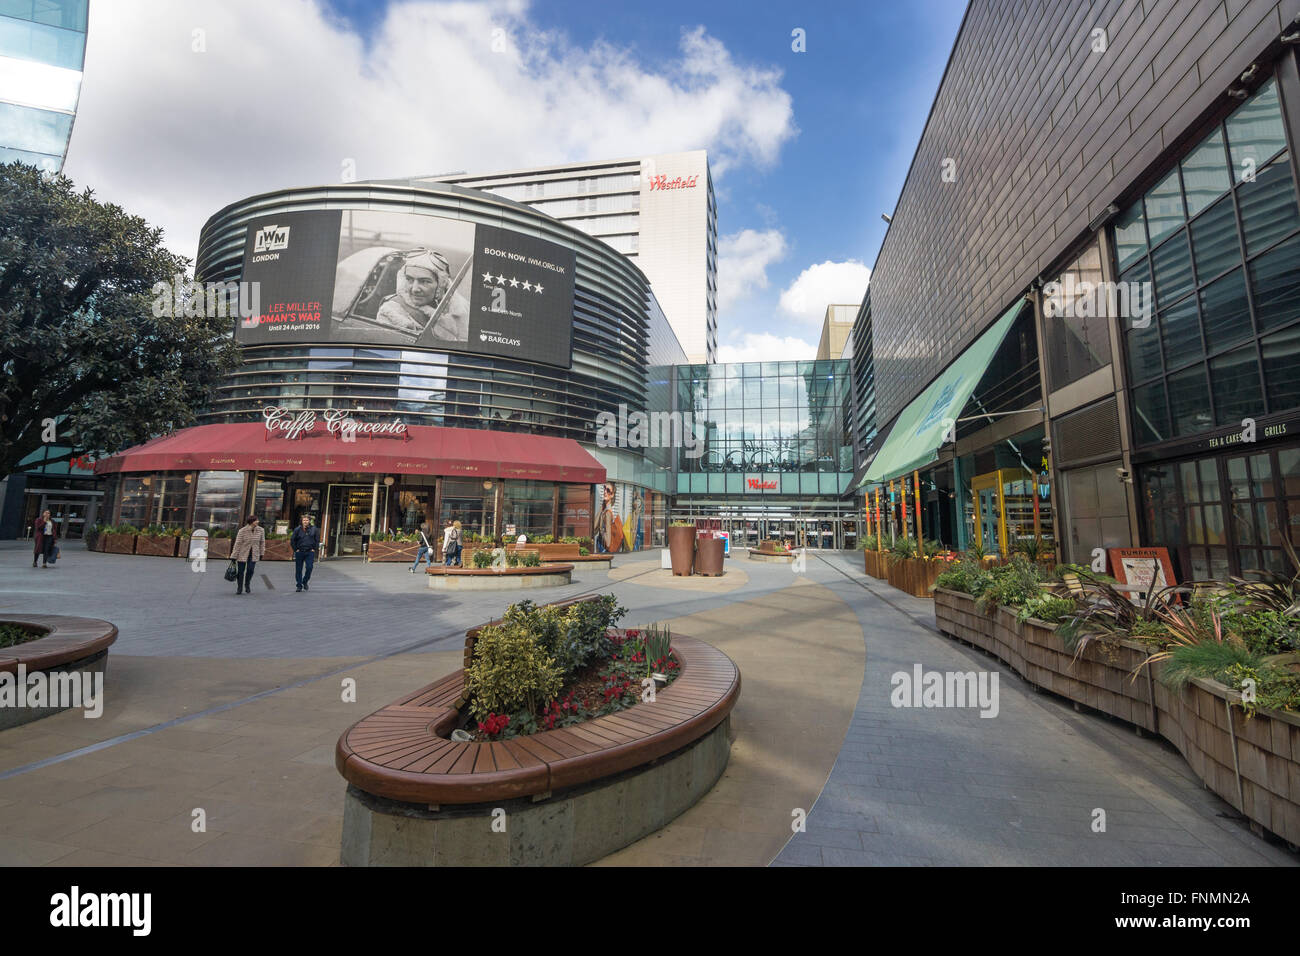 westfield shopping centre, stratford Stock Photo